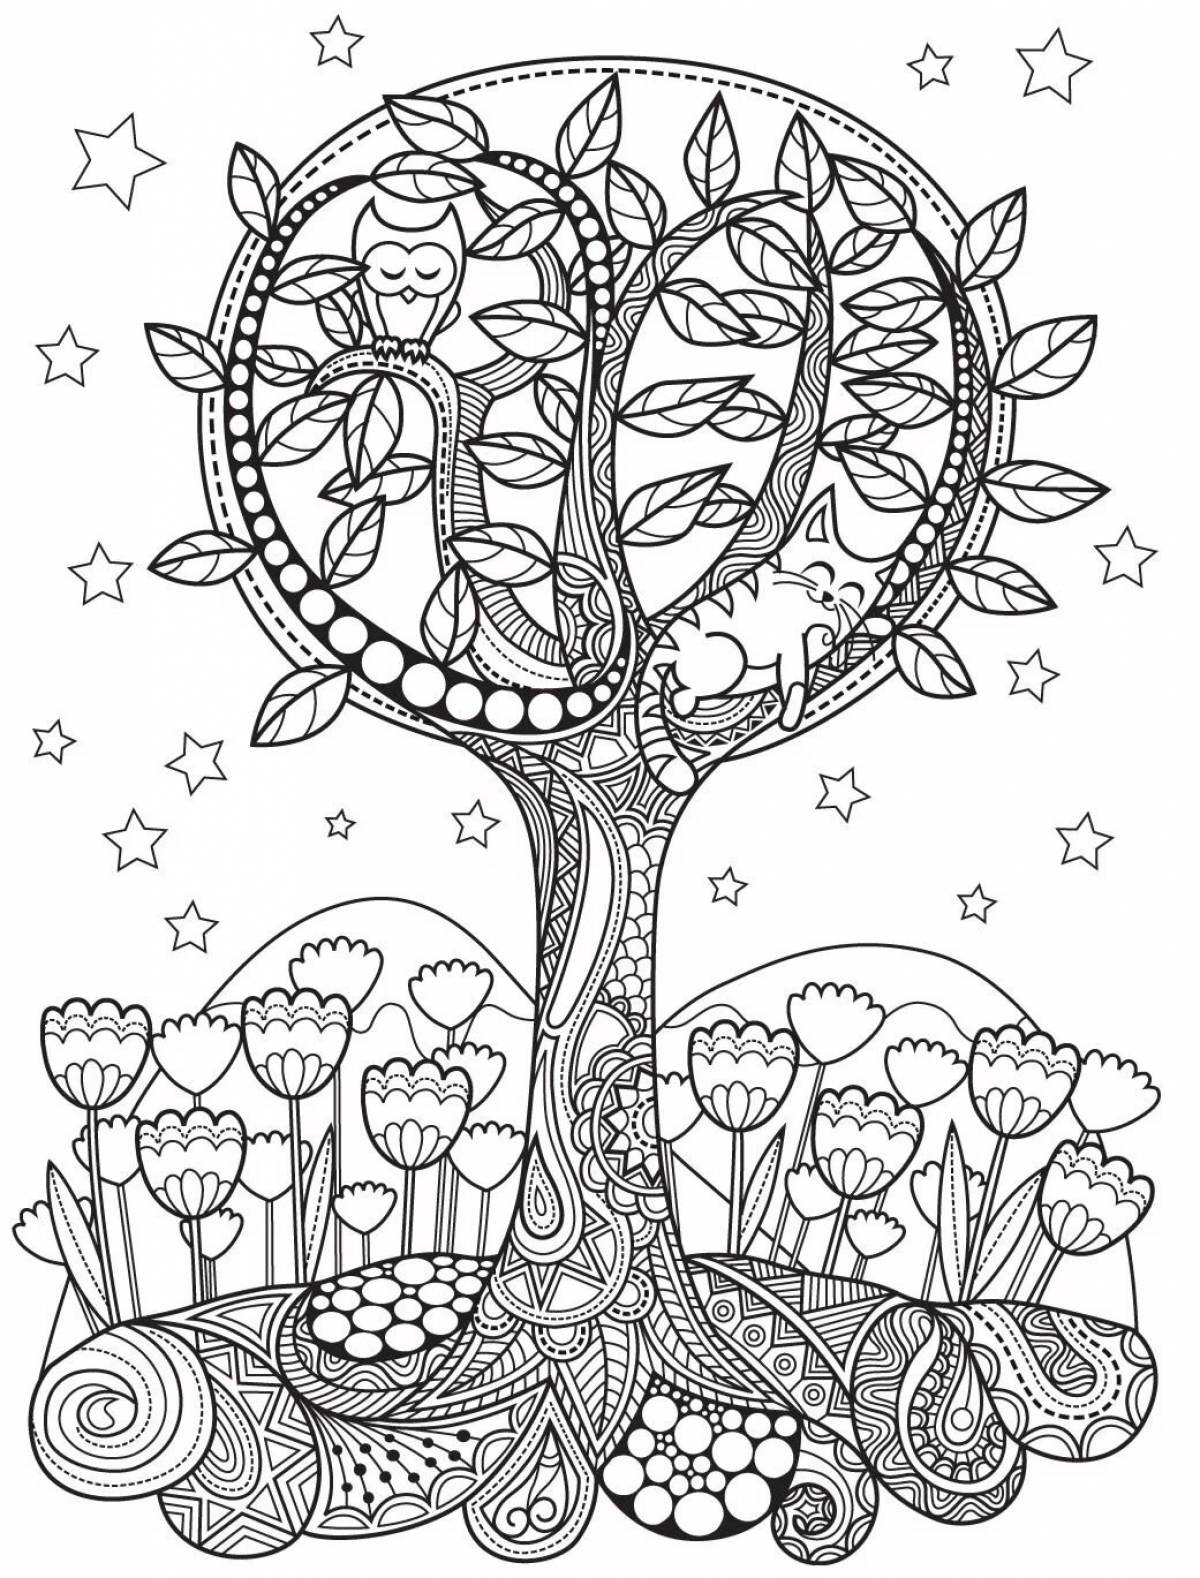 Stimulated spring anti-stress coloring book